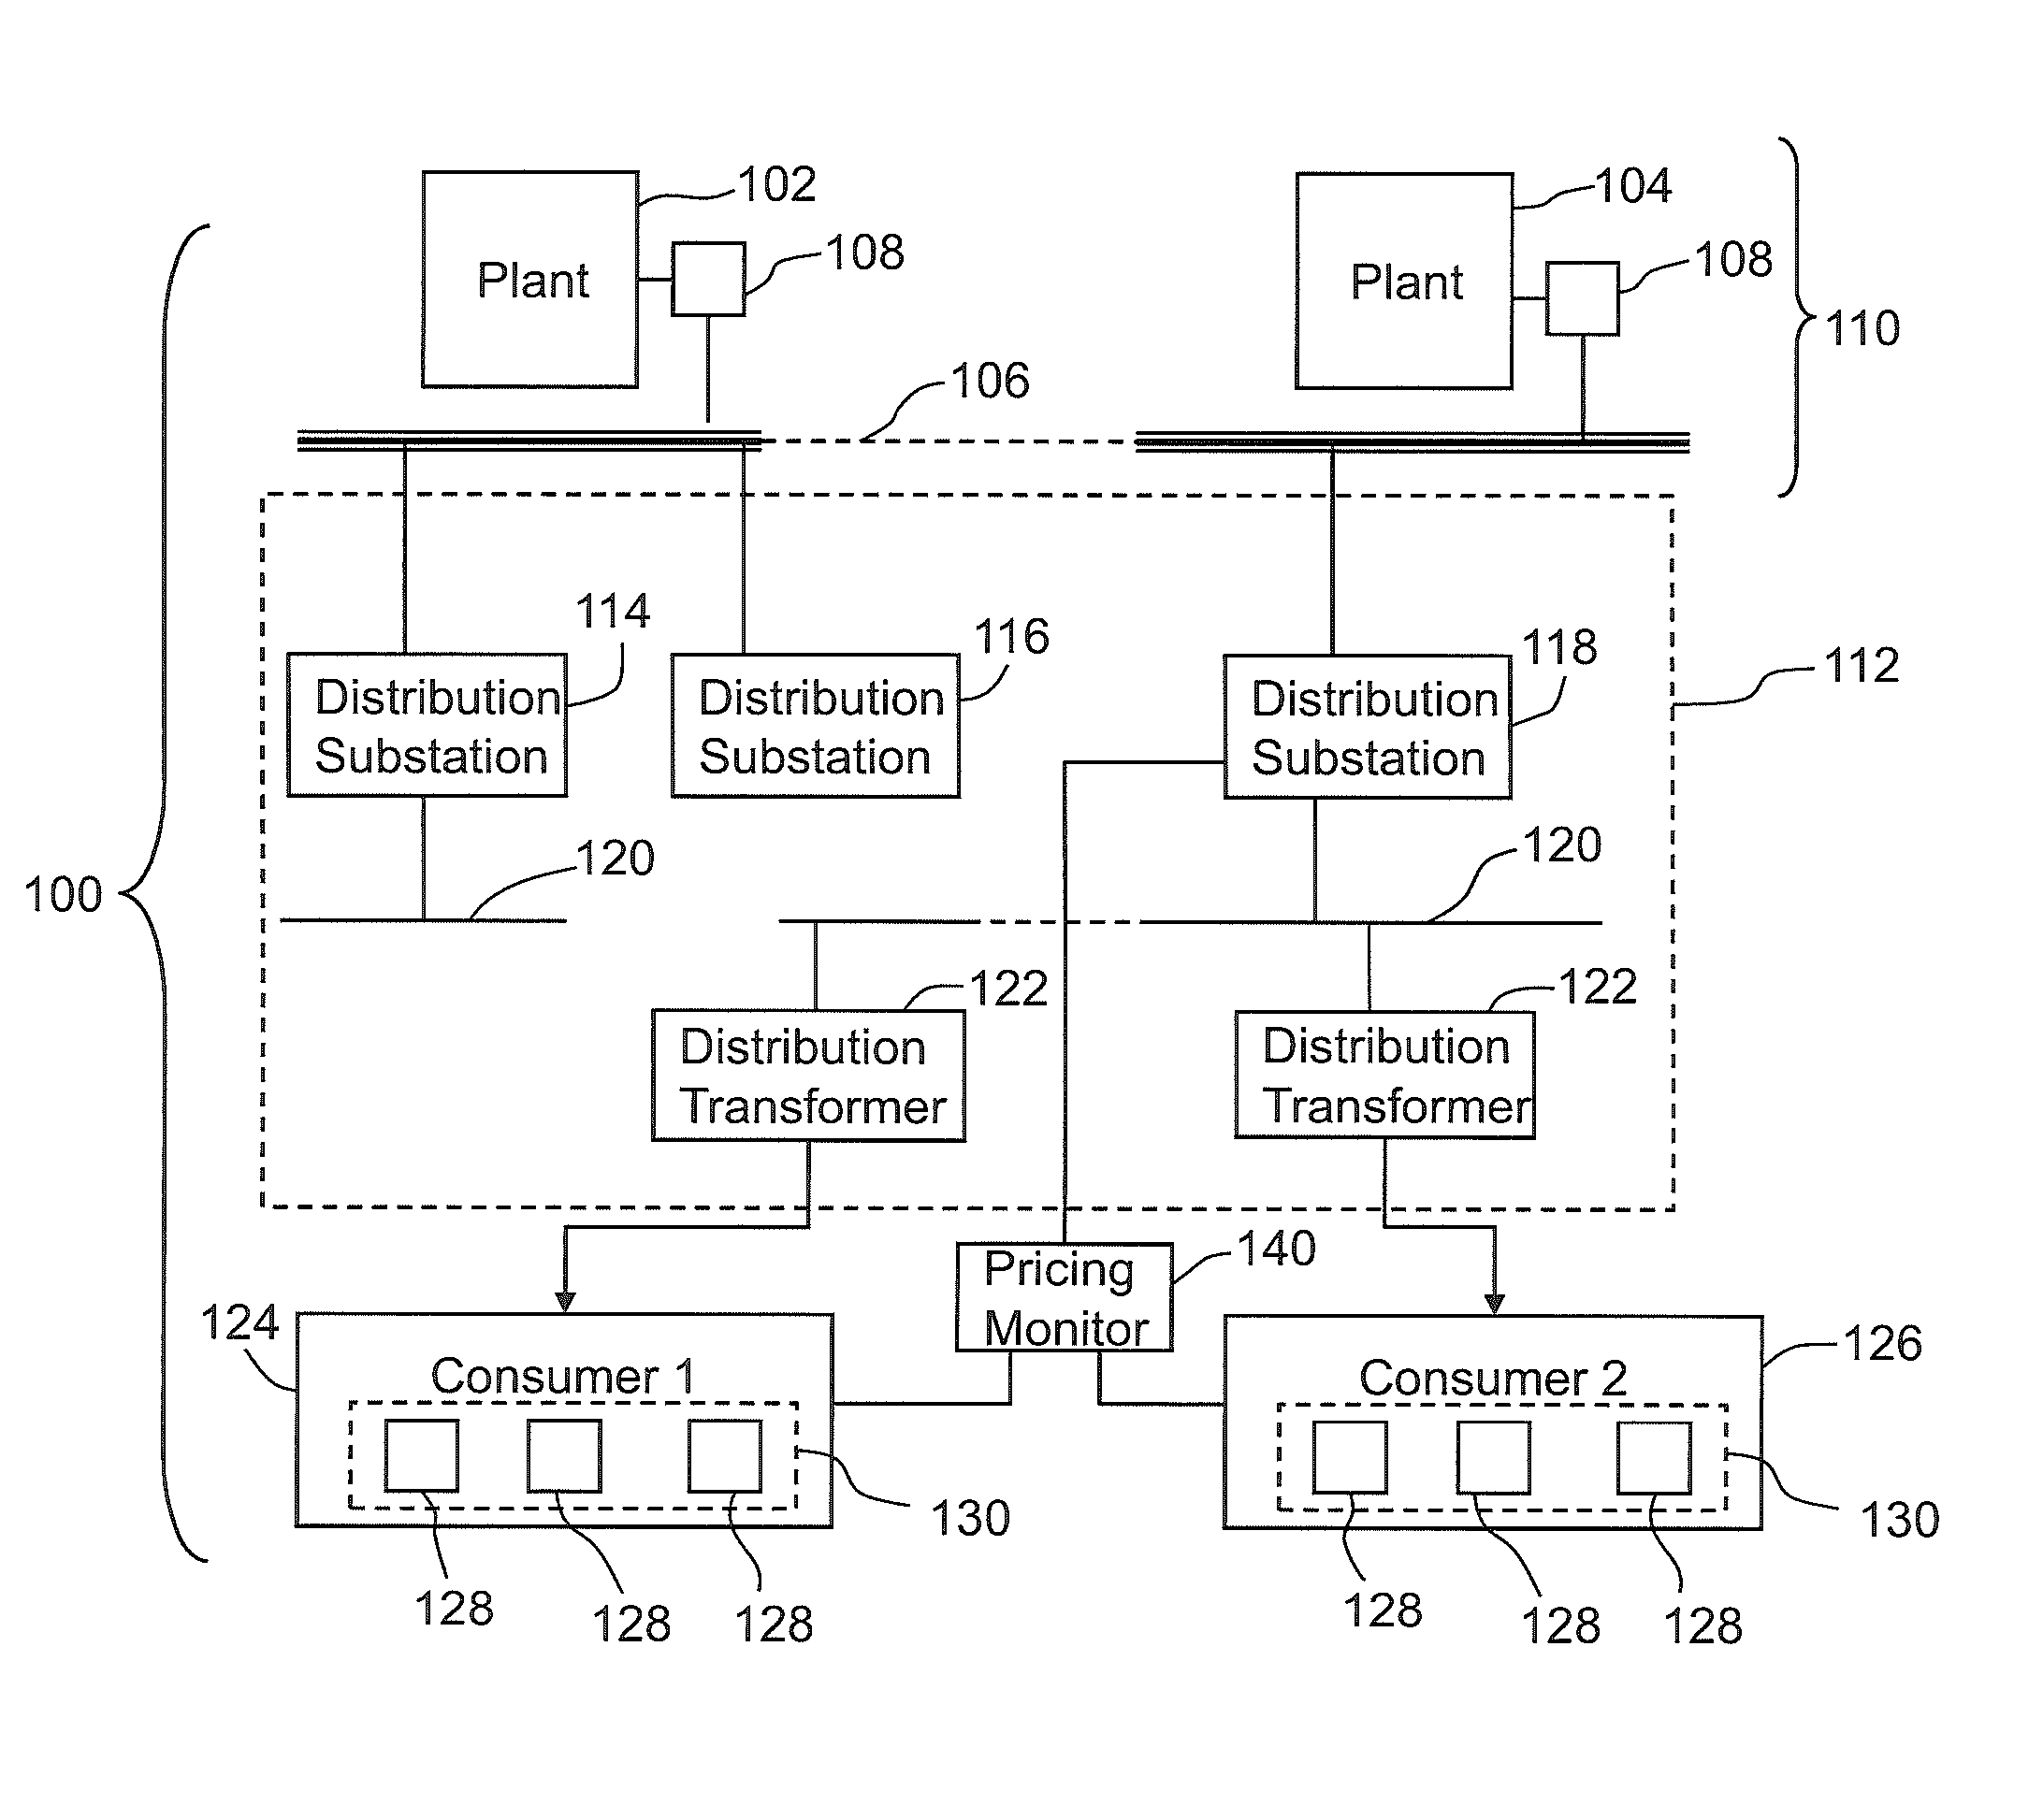 System and method for implementing congestion pricing in a power distribution network